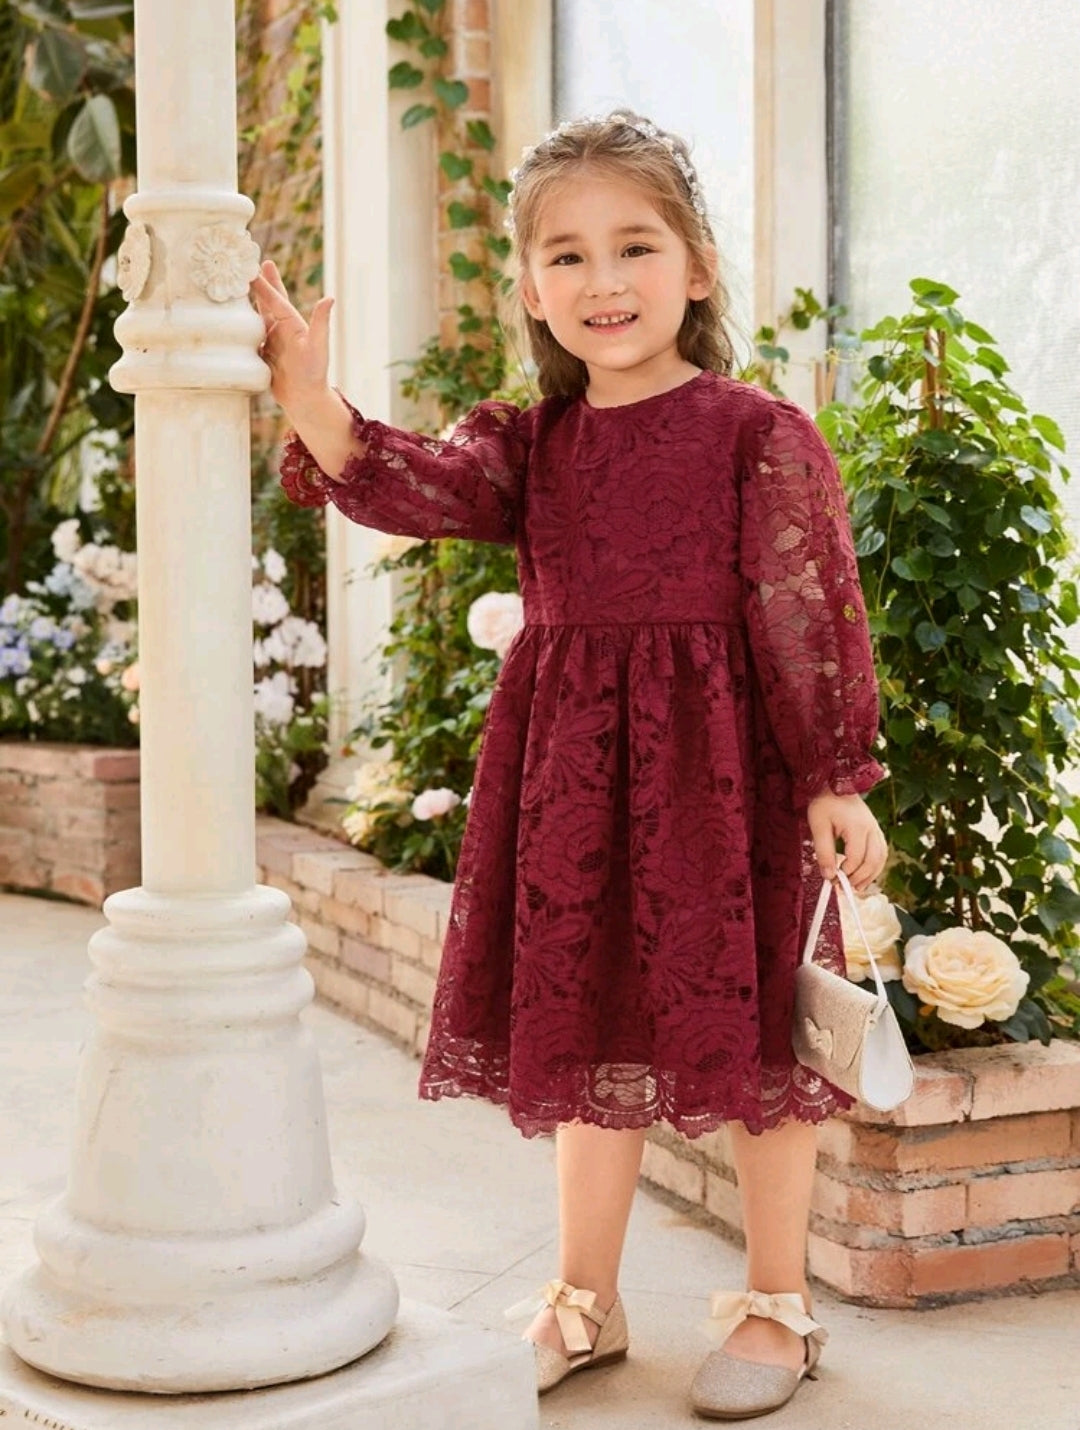 Maroon Lace Long Sleeve Special Occasions Dress